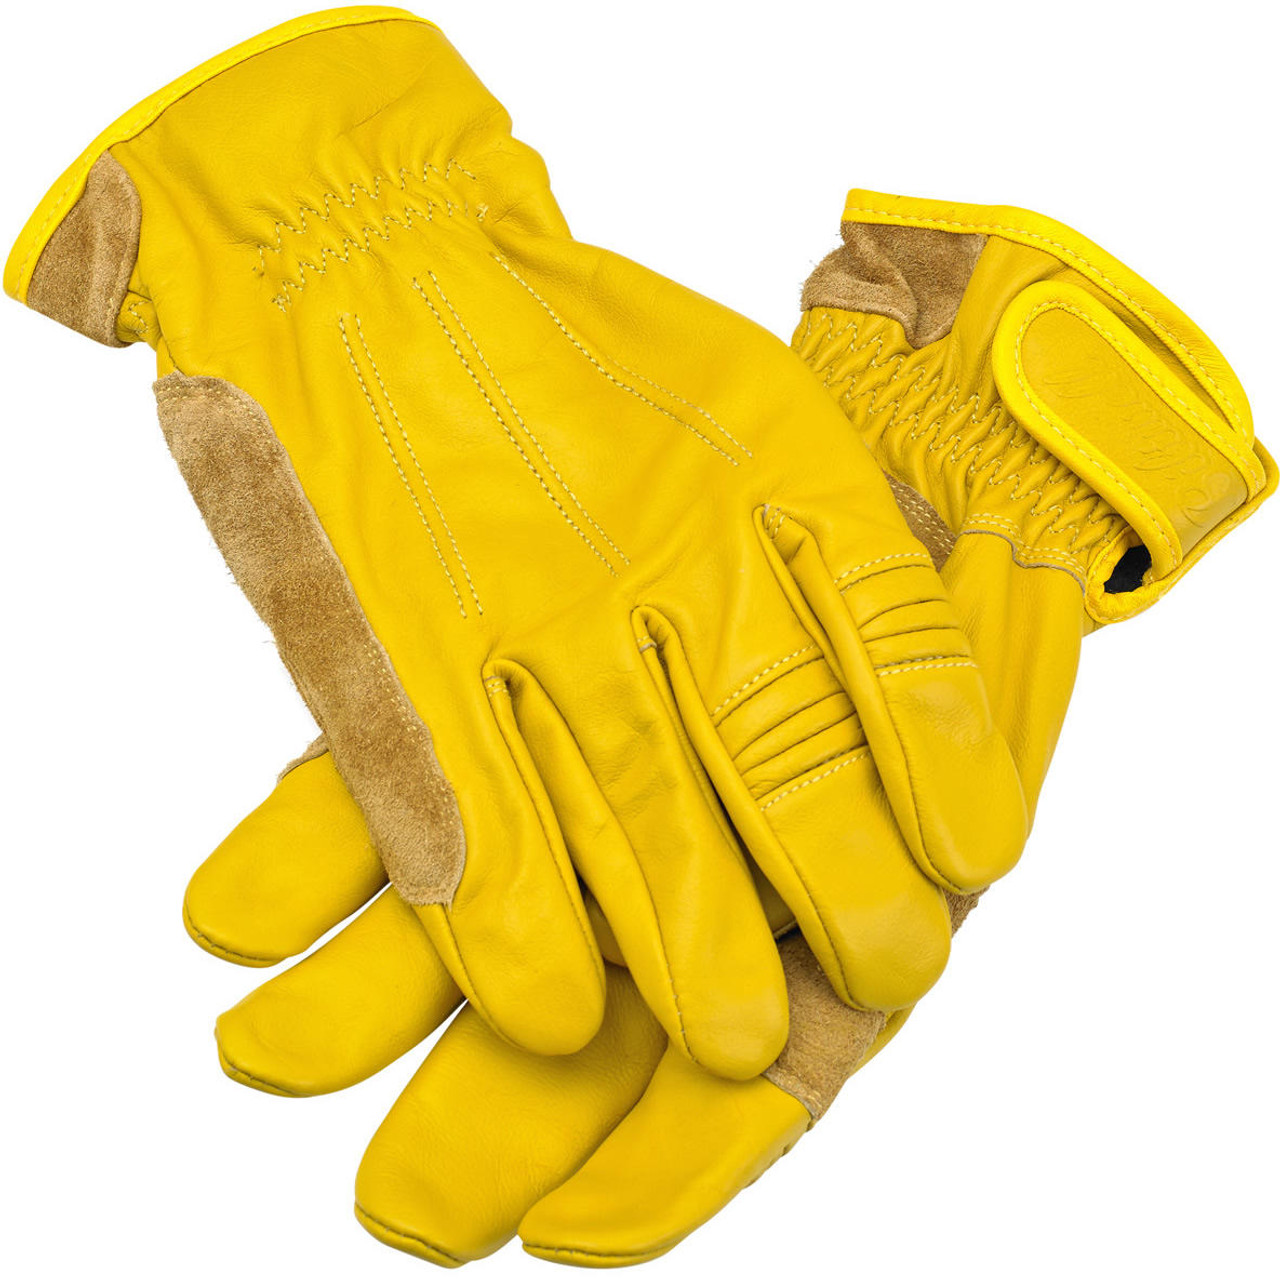 https://cdn11.bigcommerce.com/s-5m0fr/images/stencil/1280x1280/products/376/27514/biltwell_work_gloves_large_539_1438795258_gloves_work_tan_pair2__04444.1440552835.jpg?c=2?imbypass=on